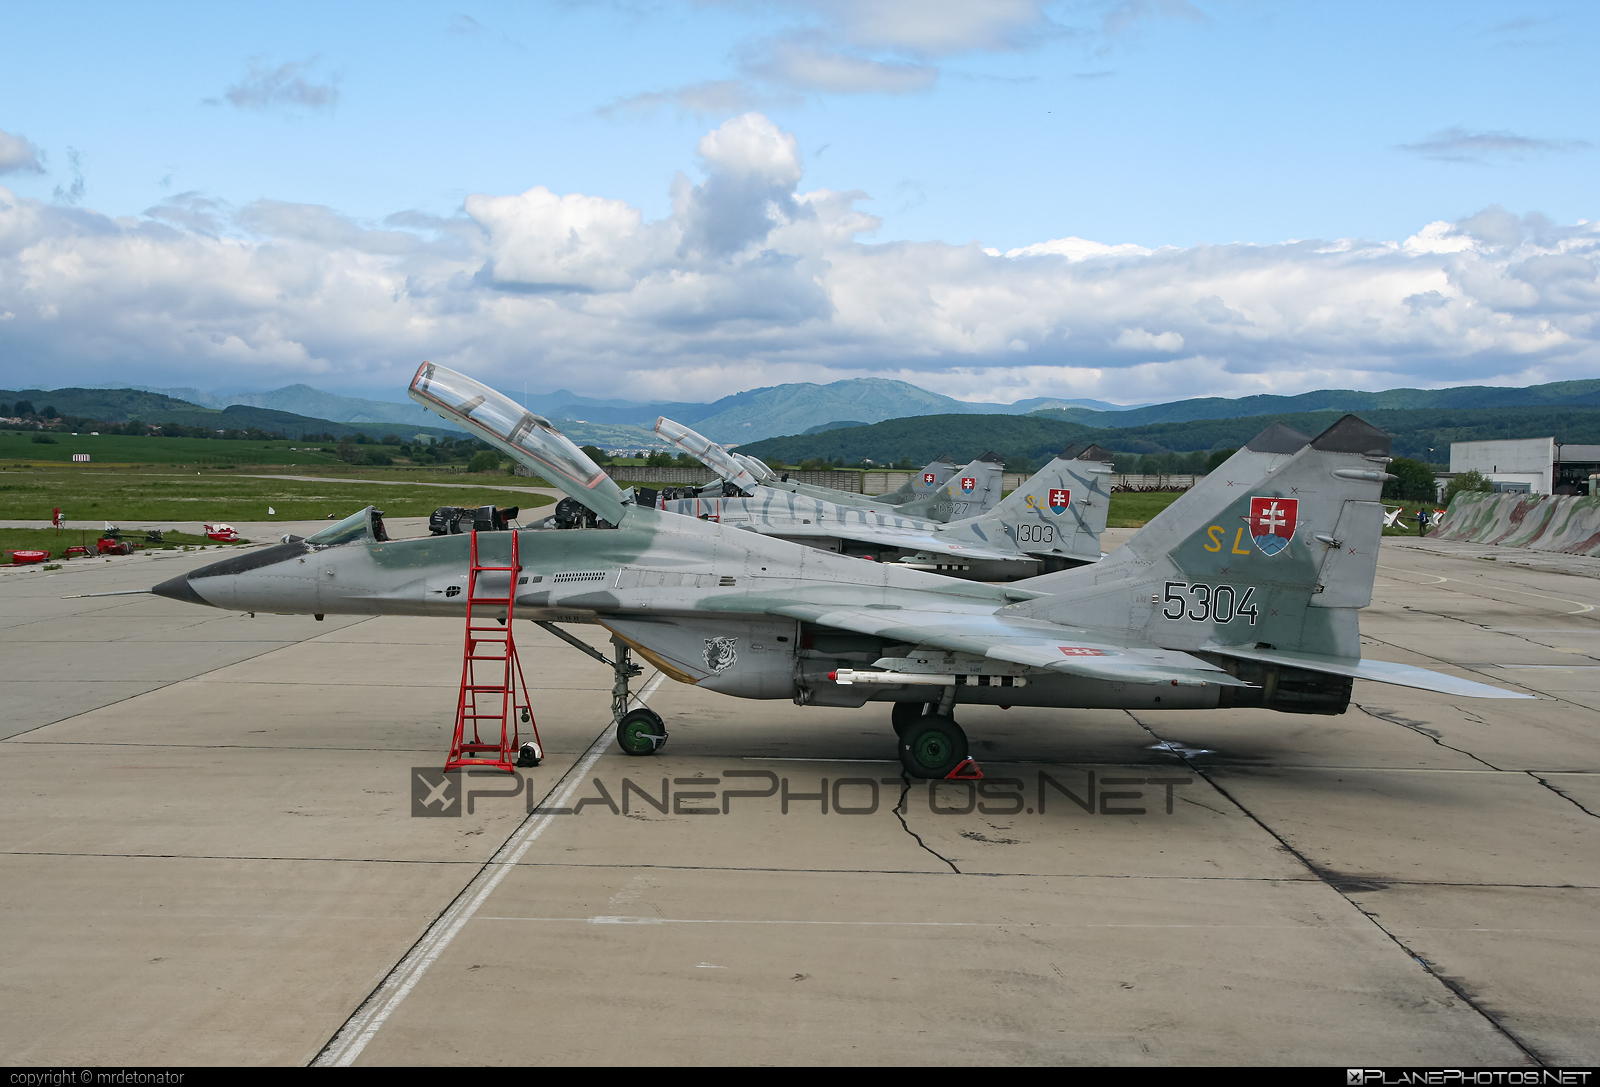 Mikoyan-Gurevich MiG-29UBS - 5304 operated by Vzdušné sily OS SR (Slovak Air Force) #mig #mig29 #mig29ubs #mikoyangurevich #slovakairforce #vzdusnesilyossr